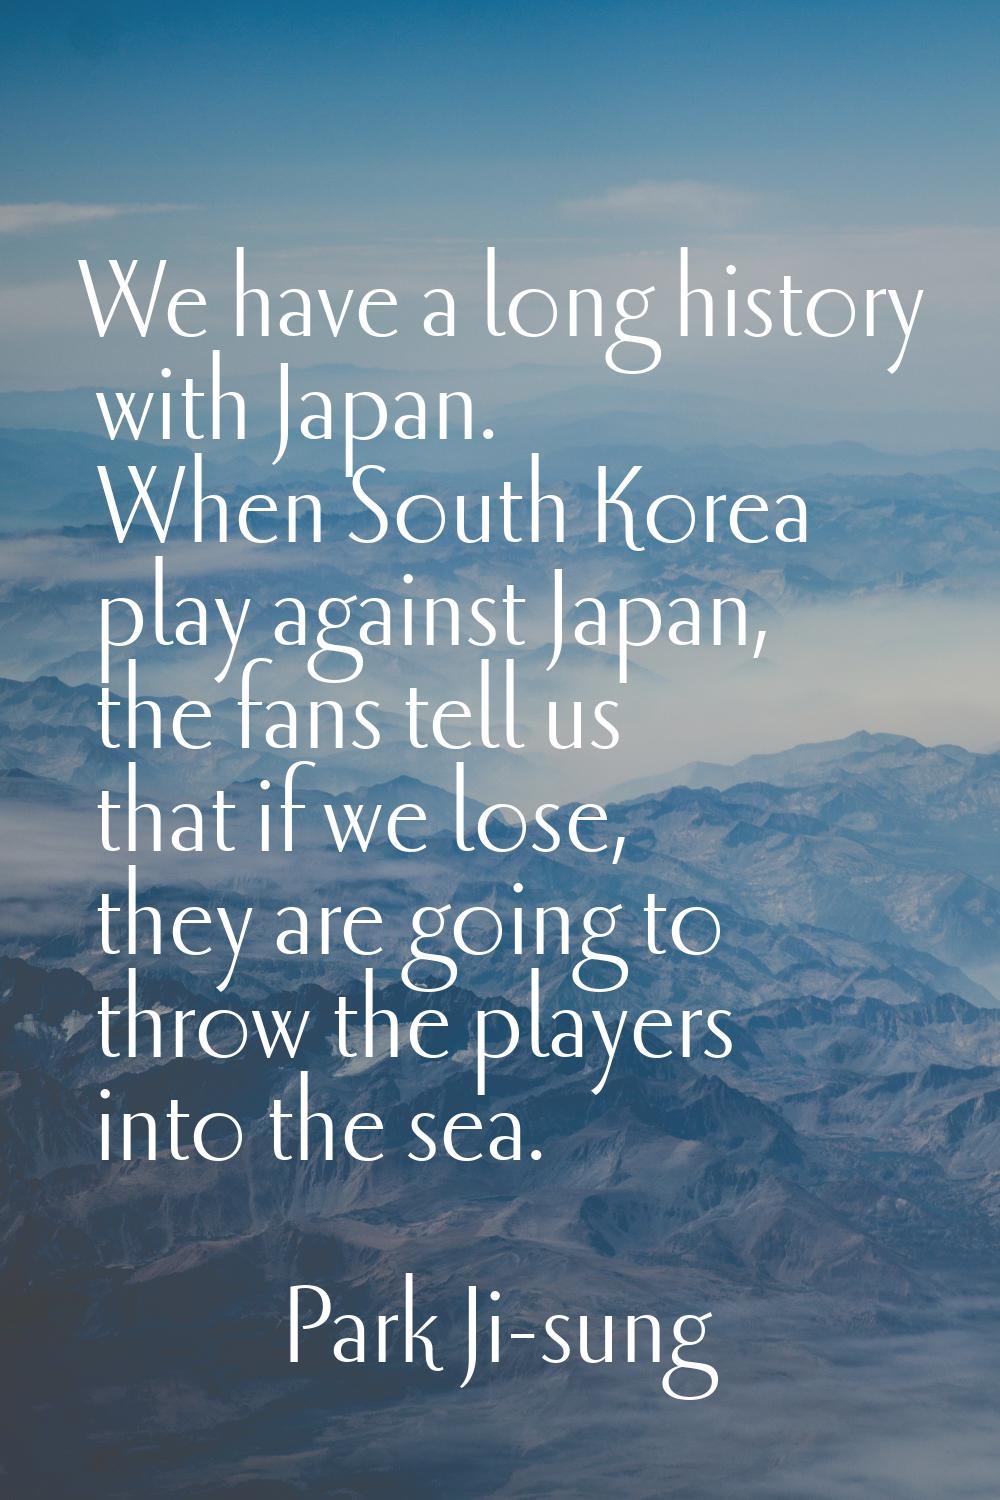 We have a long history with Japan. When South Korea play against Japan, the fans tell us that if we